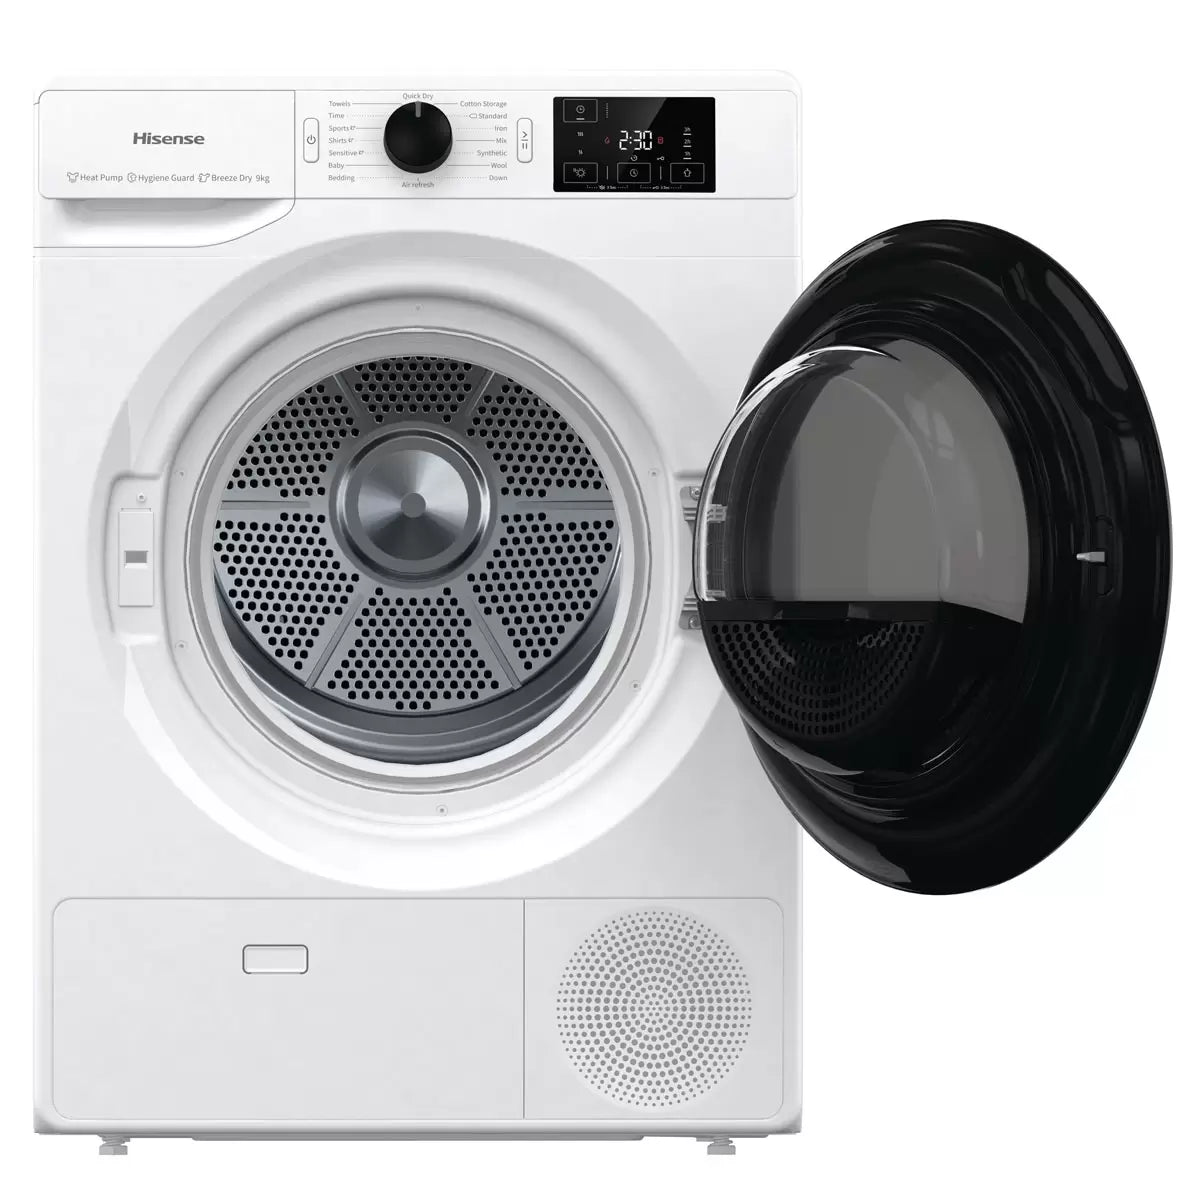 Hisense DHGE904, 9kg, Heat Pump Dryer, A++ Rated in White (EX-DISPLAY/A)